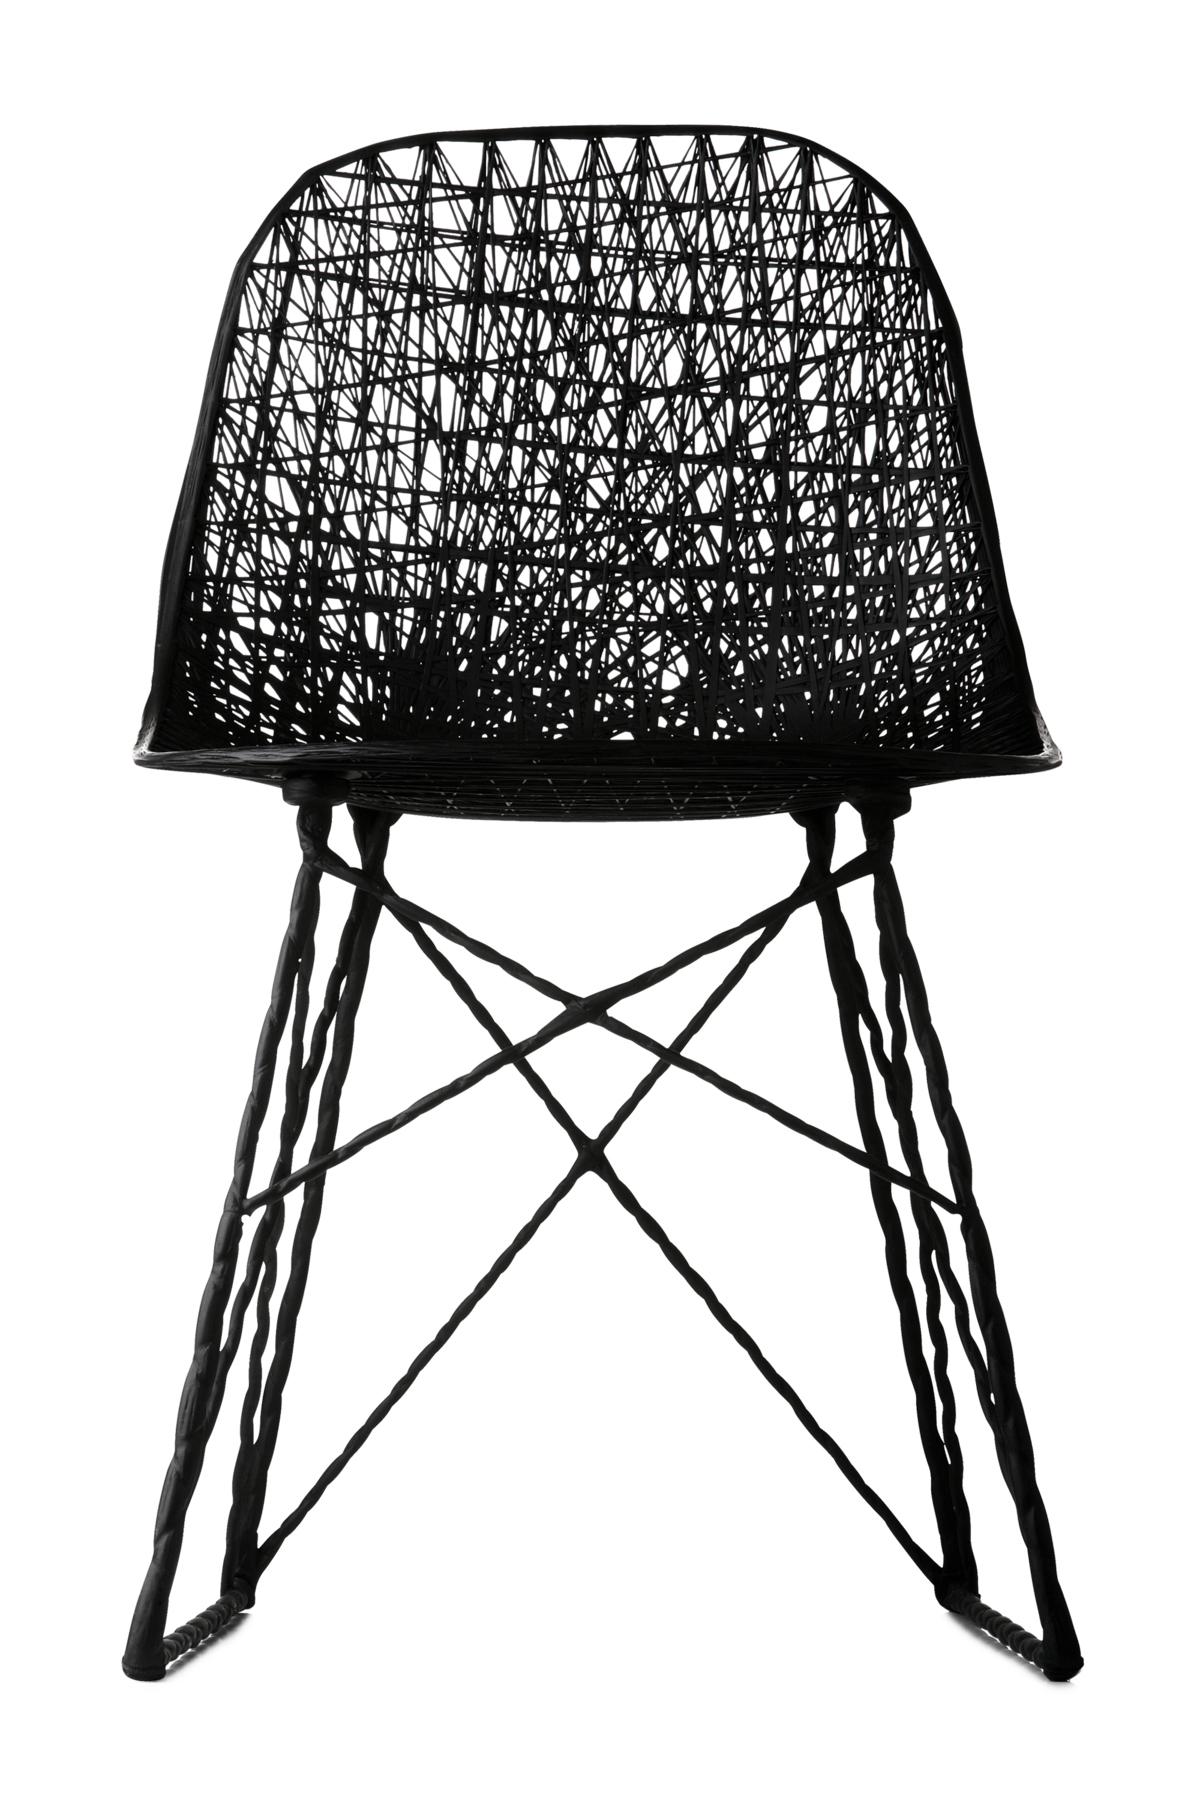 The Carbon Chair of Bertjan Pot and Marcel Wanders speaks of dedicated craftsmanship in connection to high tech materials only made possible by personal excitement, passion and enlightment. The Carbon Bar Stool is made of epoxy resin and carbon